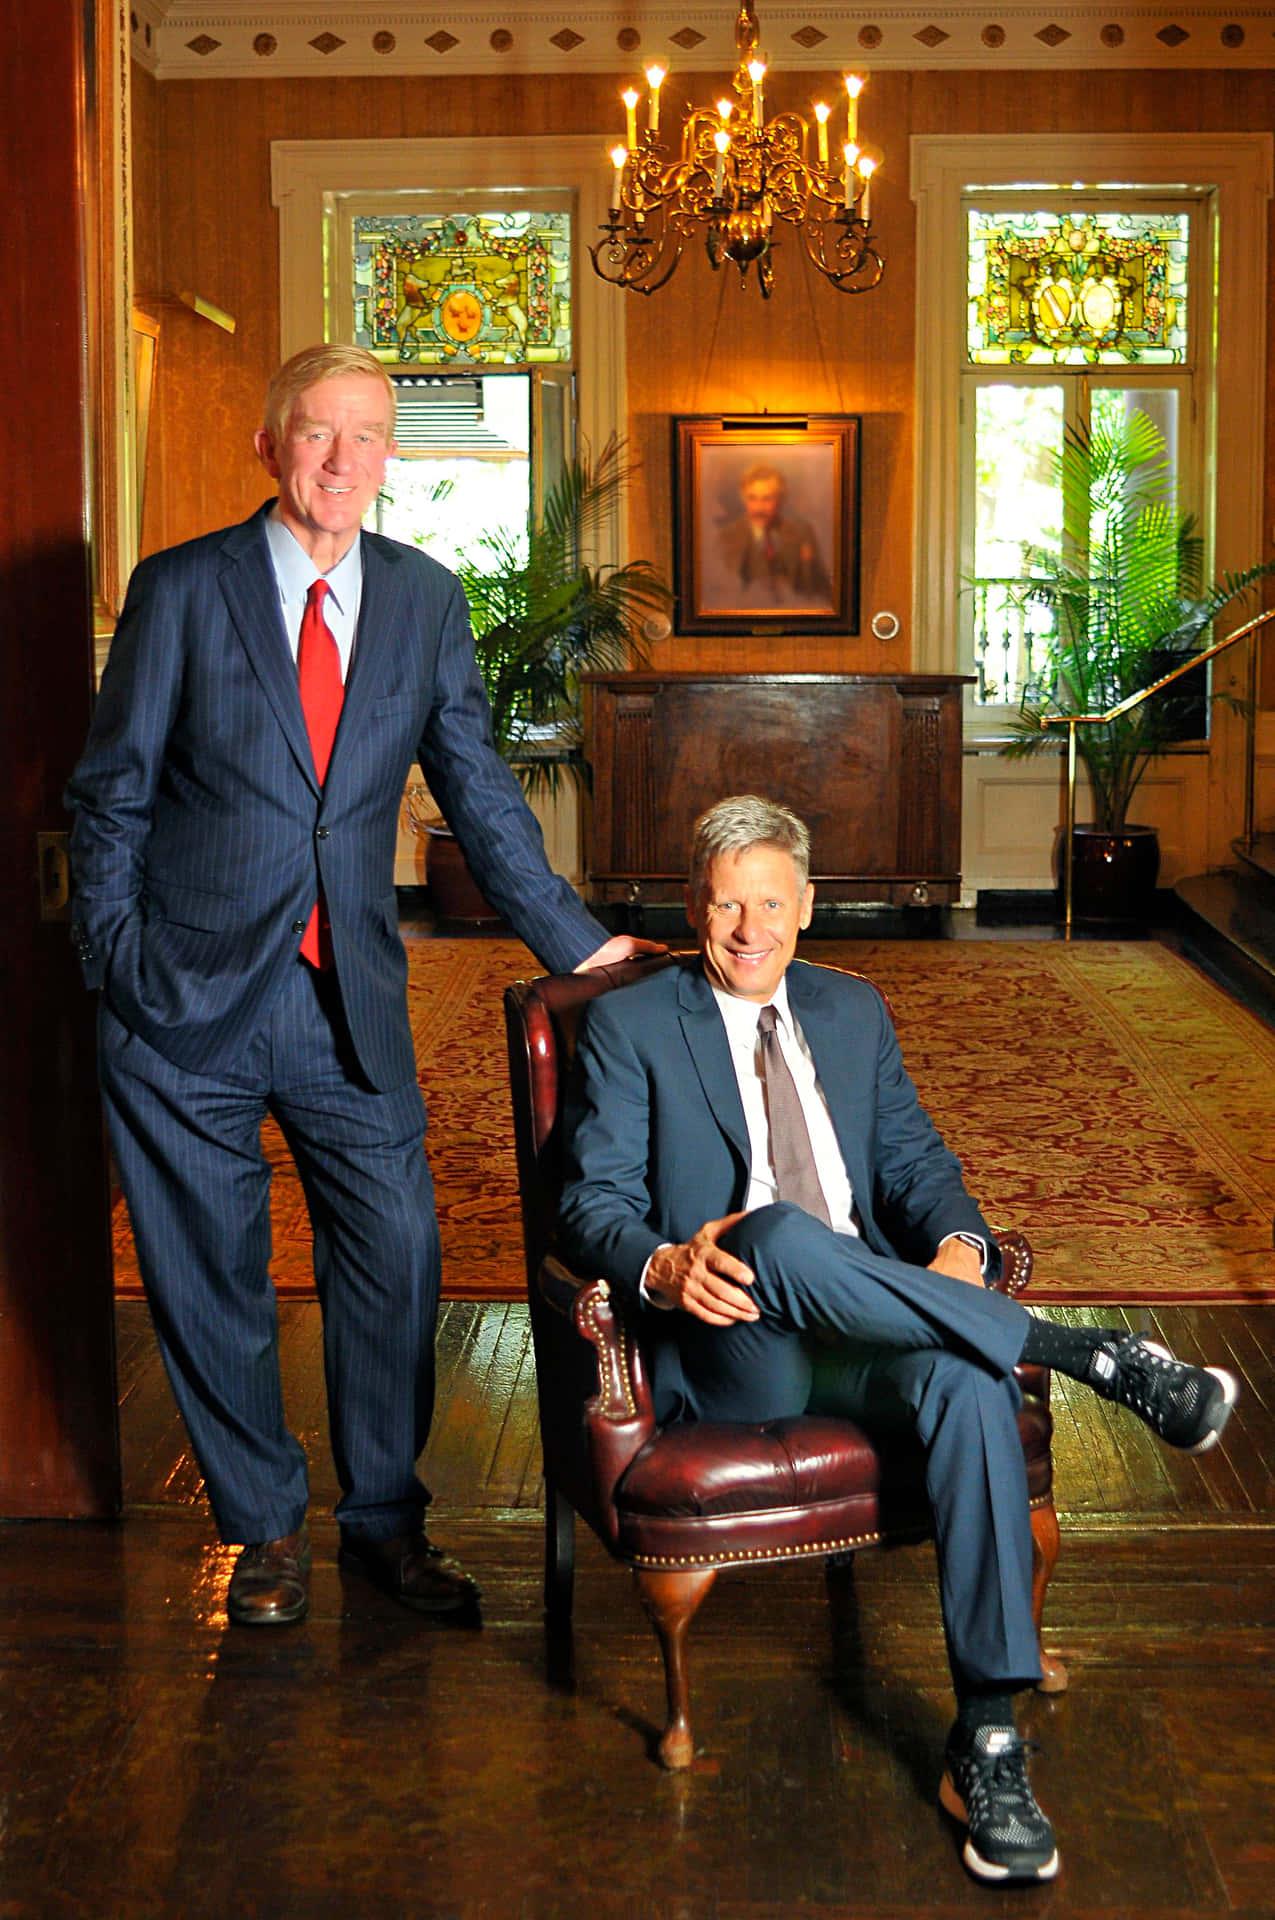 Williamweld Och Gary Johnson (could Be A Suitable Wallpaper If You Are A Fan Of These Political Figures) Wallpaper